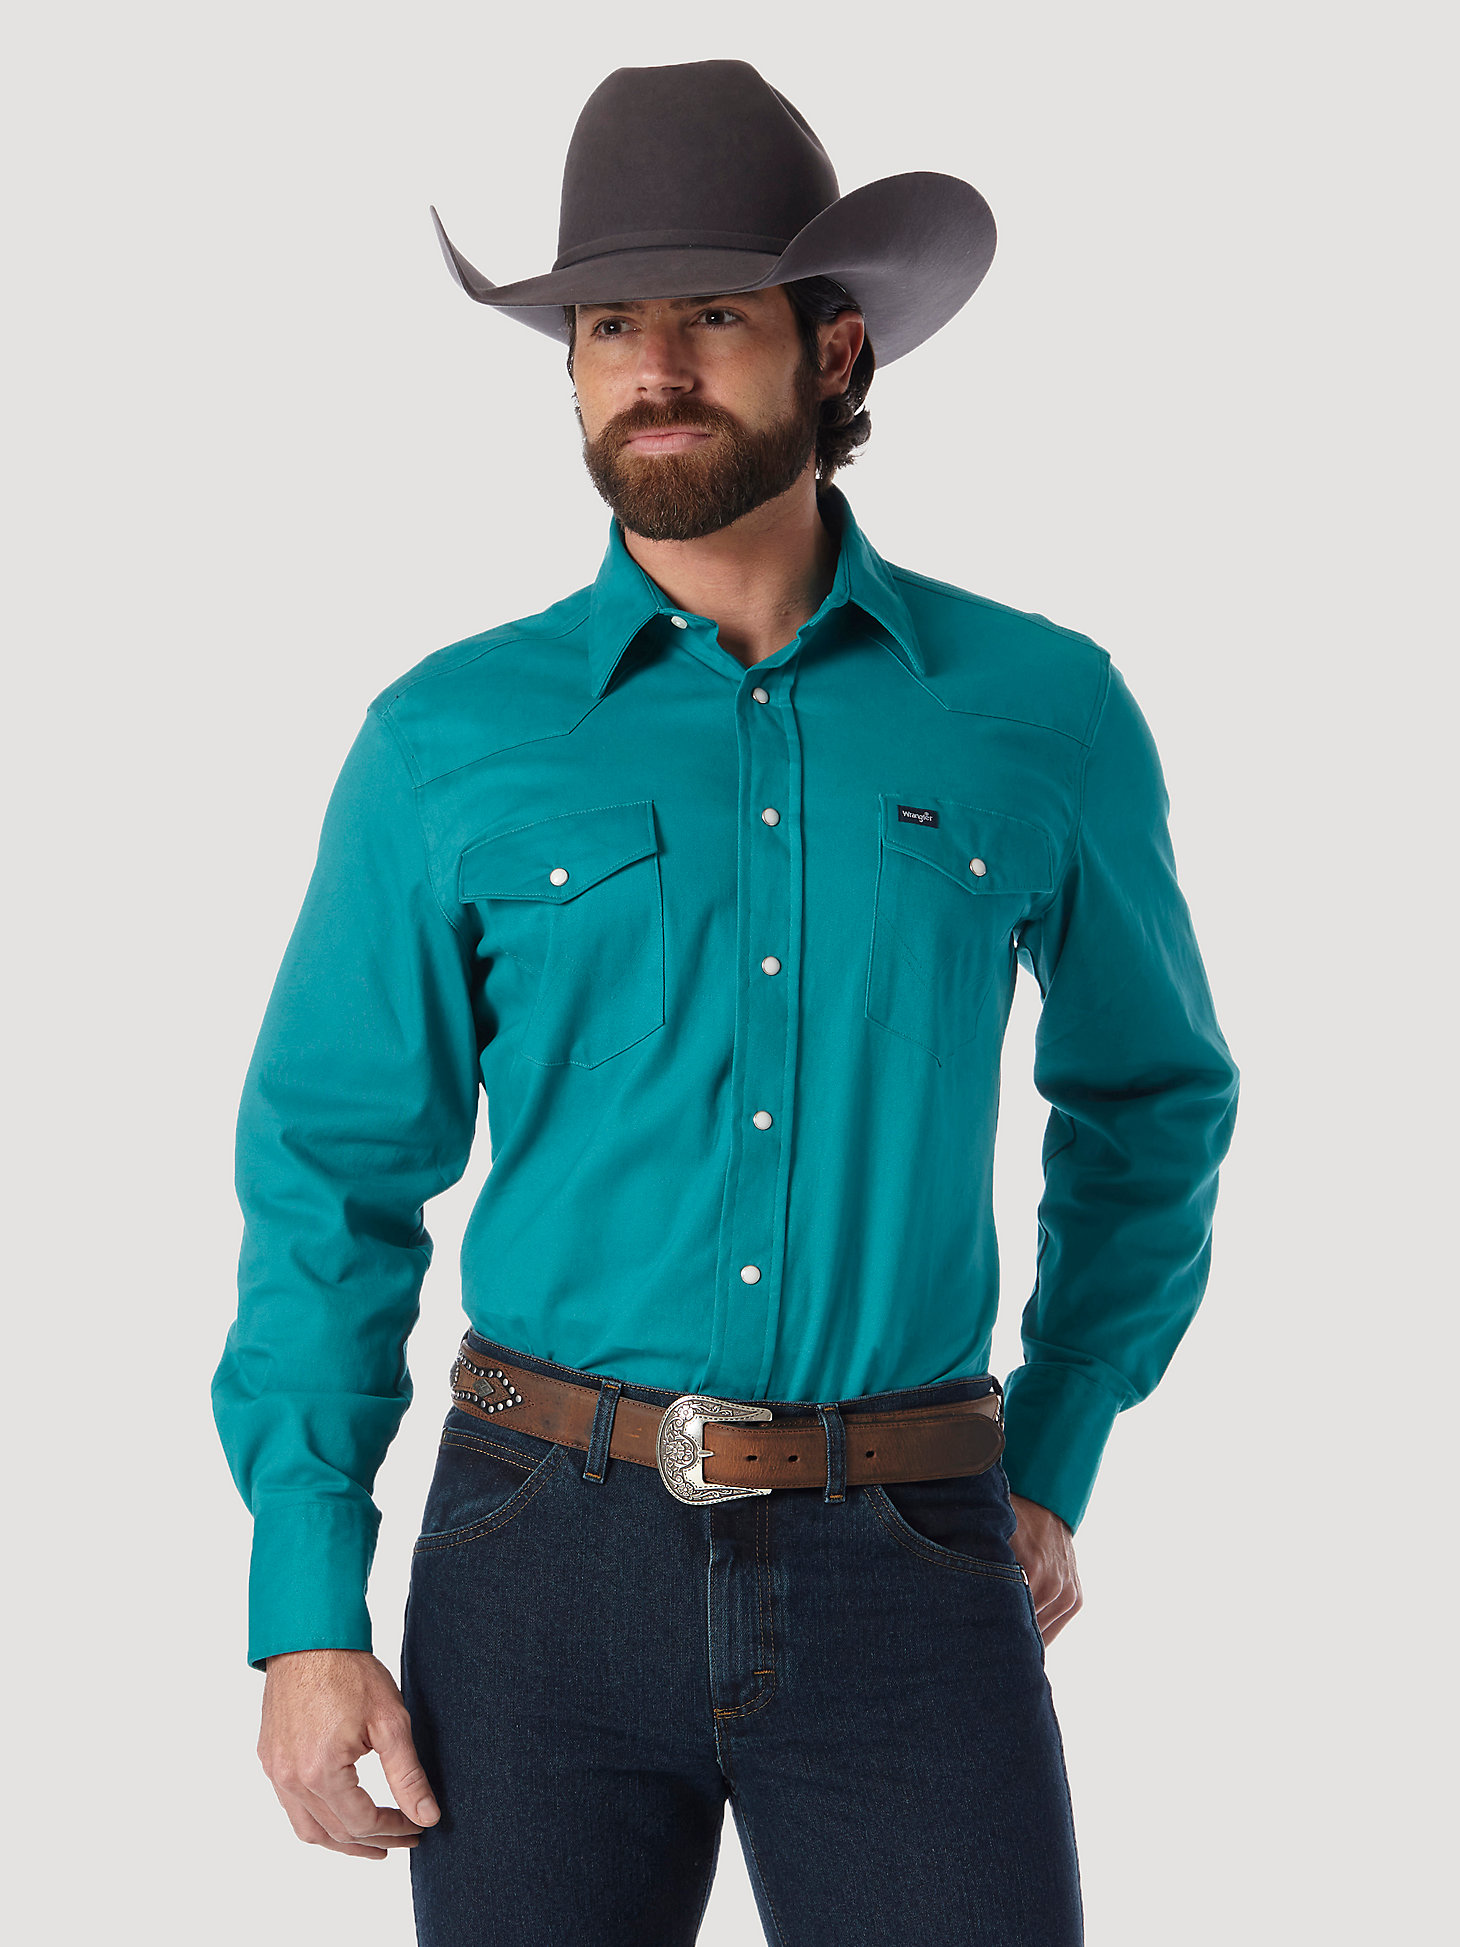 Premium Performance Advanced Comfort Cowboy Cut® Long Sleeve Spread Collar Solid Shirt in Turquoise alternative view 1